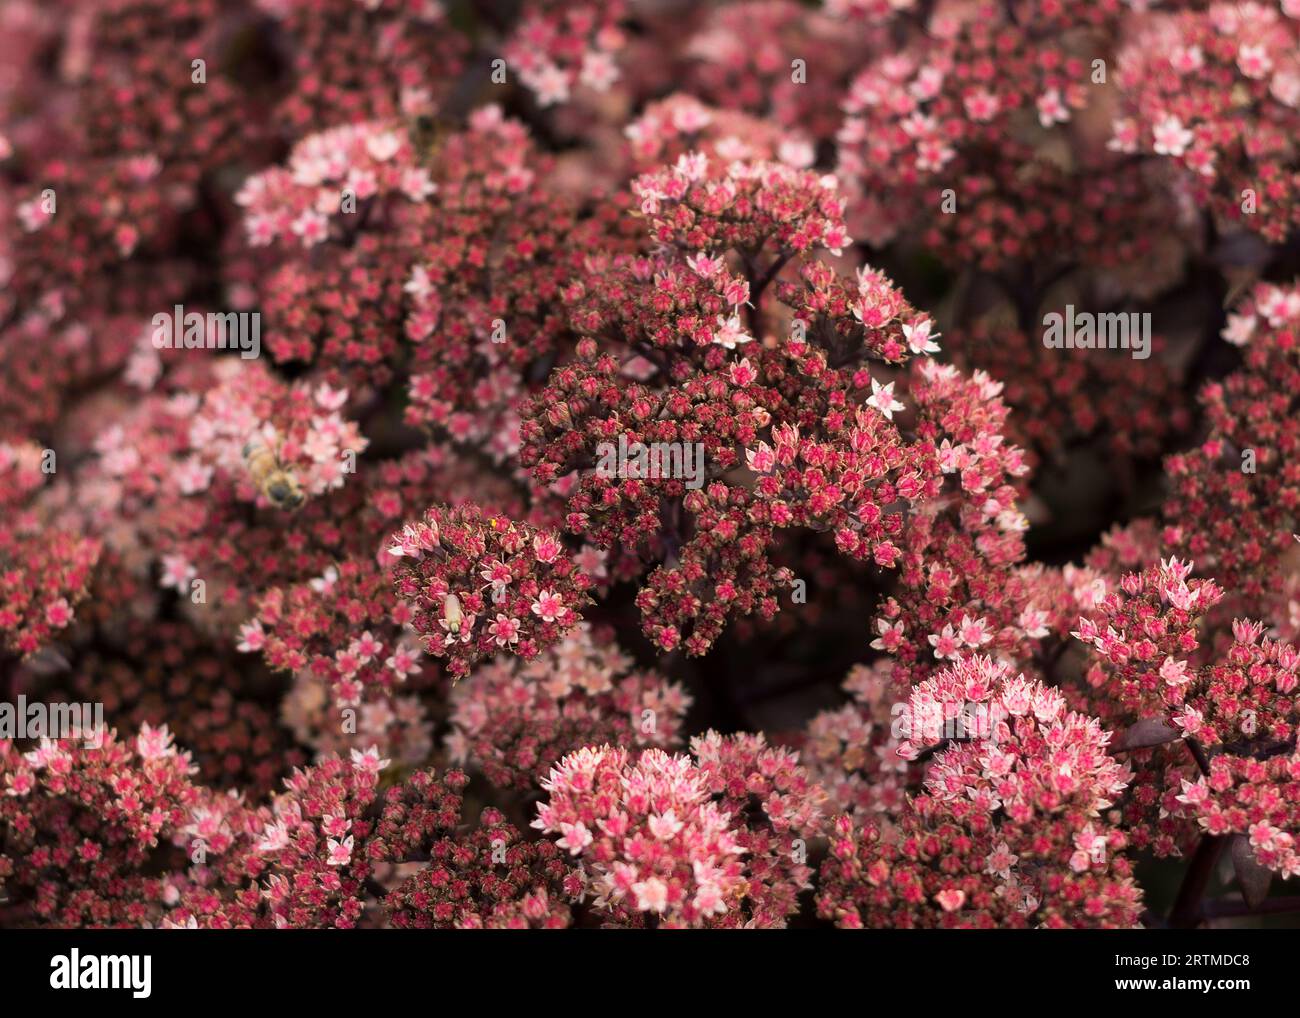 Maroon bloom of Sedum on a summer day. Close-up, selective focus, part of the image out of focus 2 Stock Photo